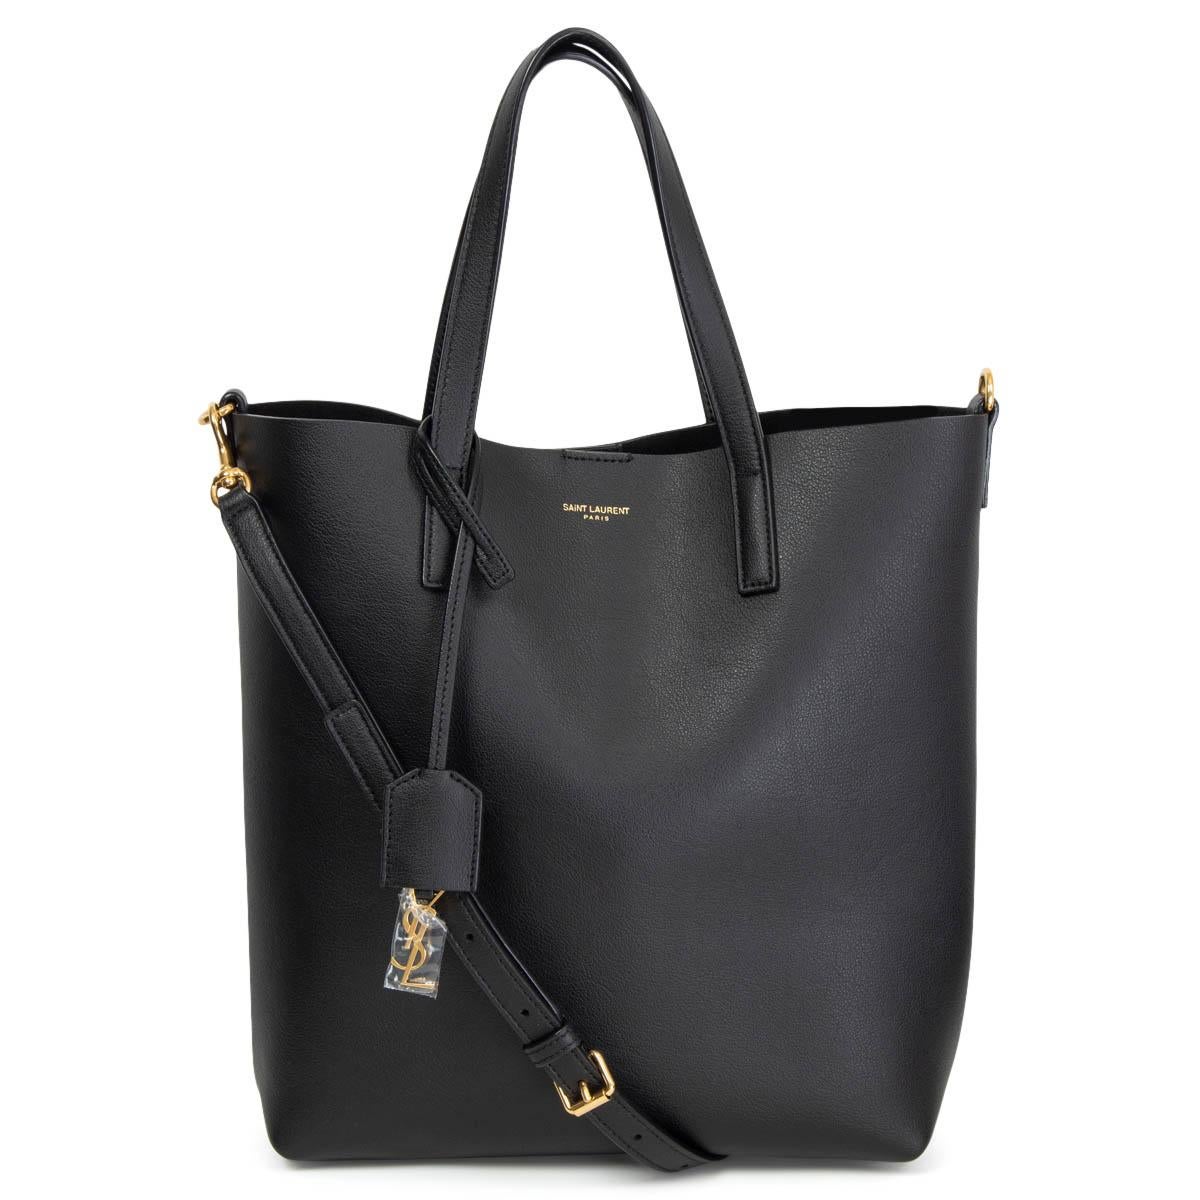 100% authentic Saint Laurent Shopping Toy Tote Bag in black leather featuring gold-tone hardware.Comes with a logo charm and a detachable shoulder-strap. Unlined. Brand new. Comes with dust bag. 

Measurements
Height	27cm (10.5in)
Width	24cm